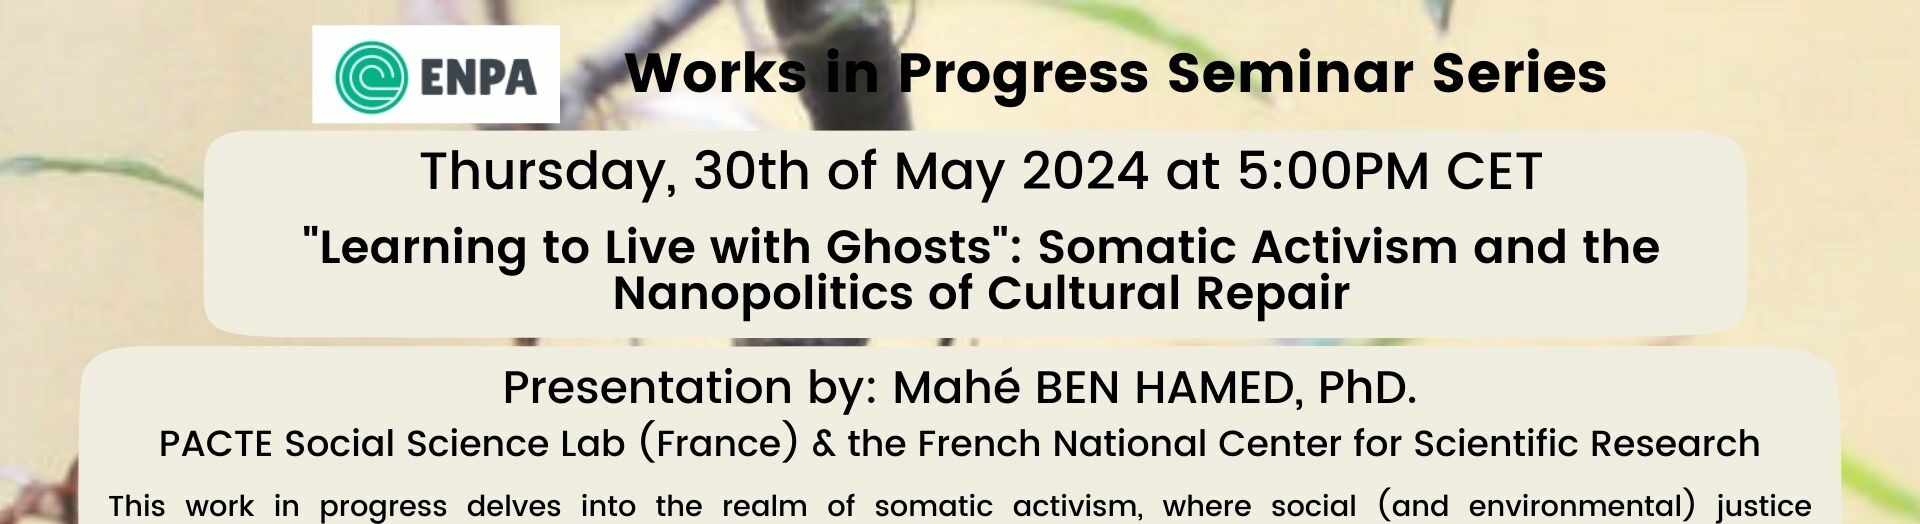 WiPS. Learning to Live with Ghosts: Somatic Activism and the Nanopolitics of Cultural Repair, Mahé Ben Hamed, 30 May